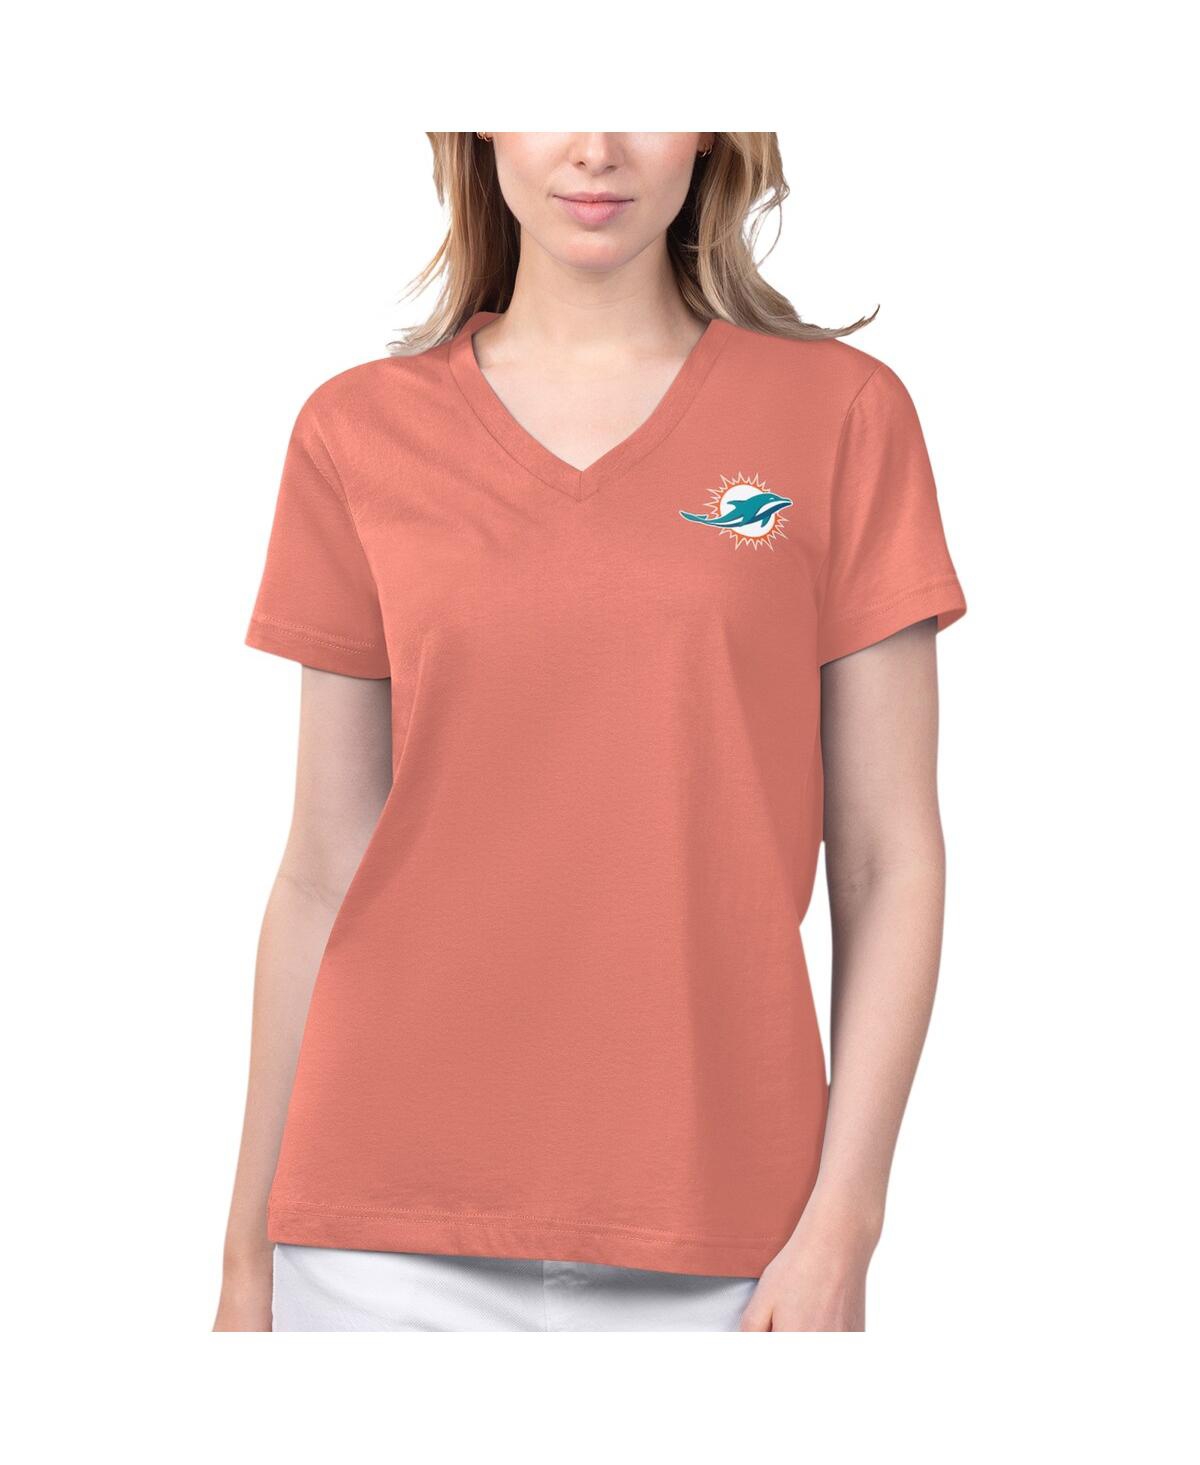 Women's Margaritaville Coral Miami Dolphins Game Time V-Neck T-shirt - Coral